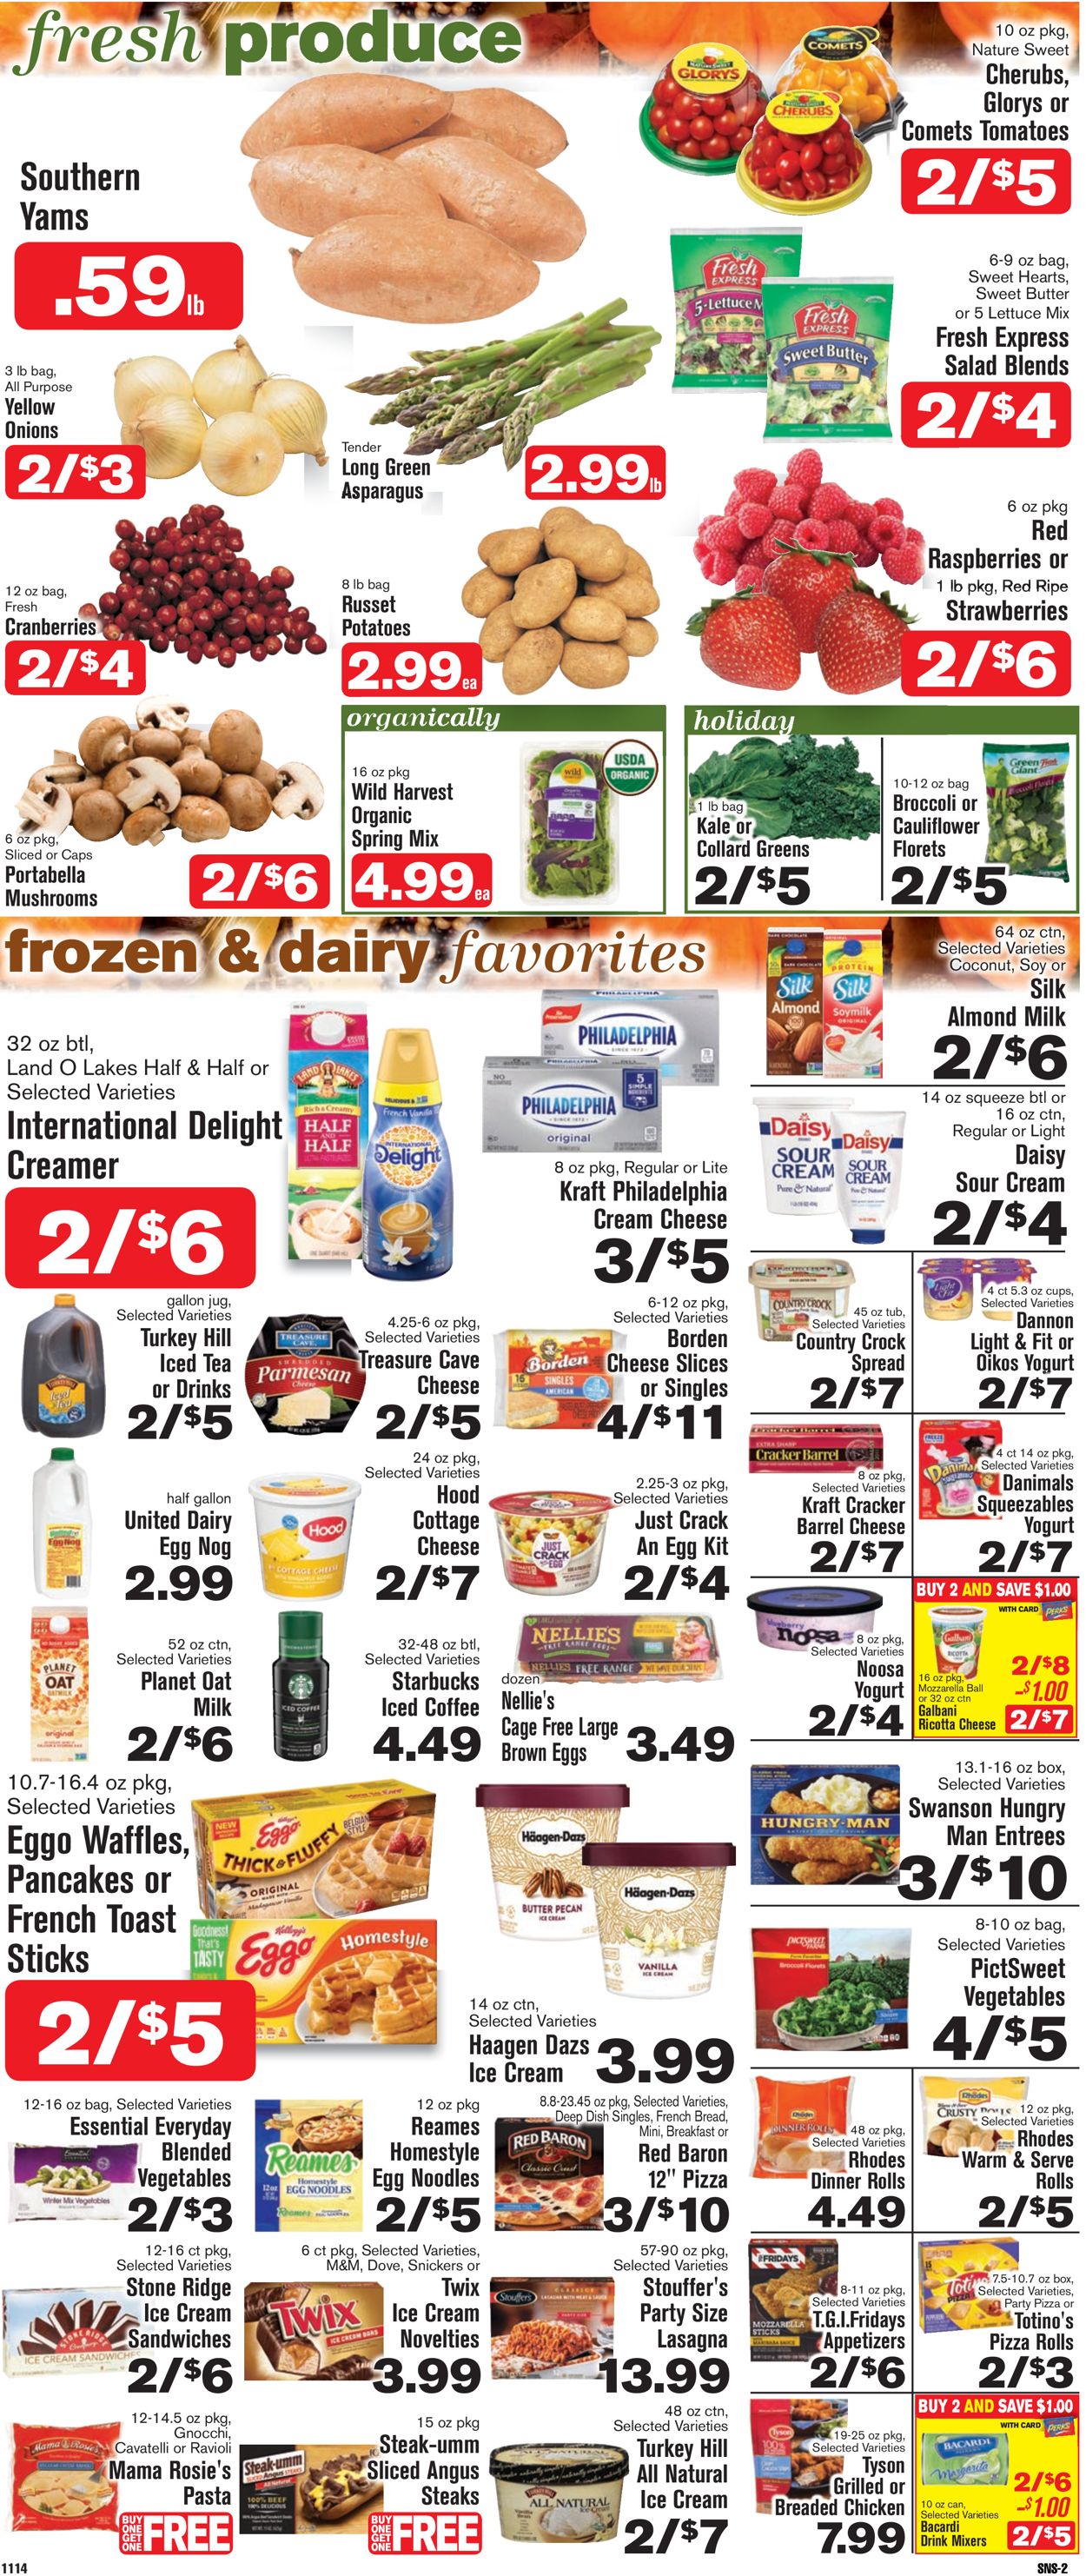 Catalogue Shop ‘n Save from 11/14/2019